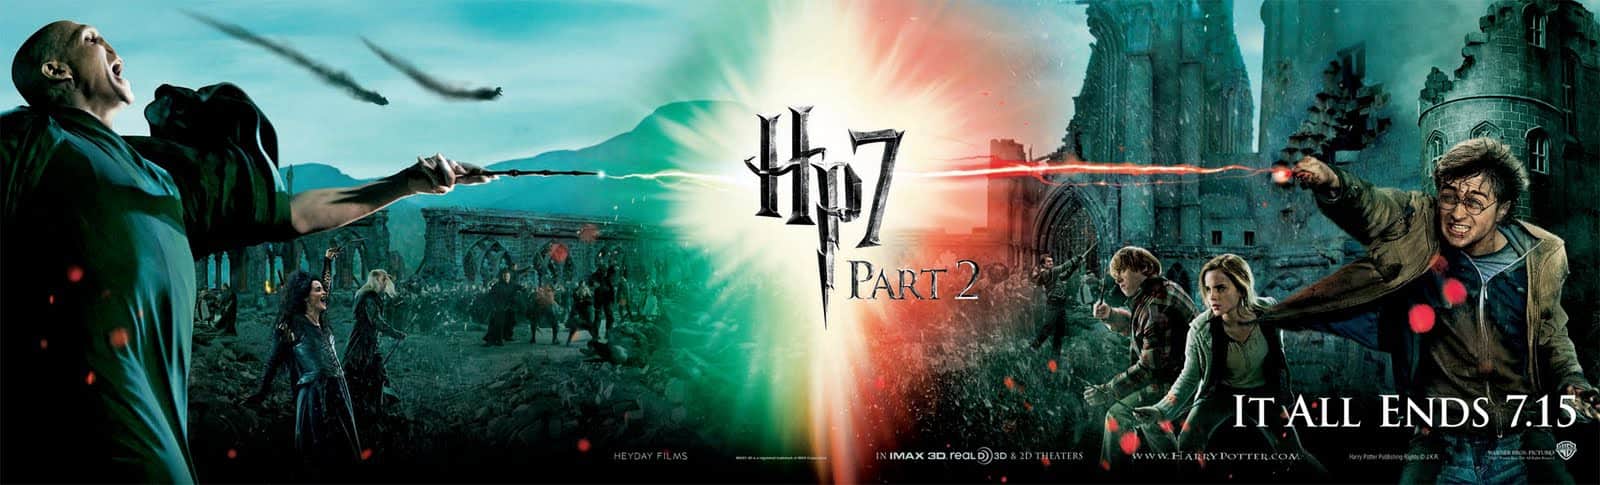 Harry Potter and the Deathly Hallows Part 2 4K 2011 big poster